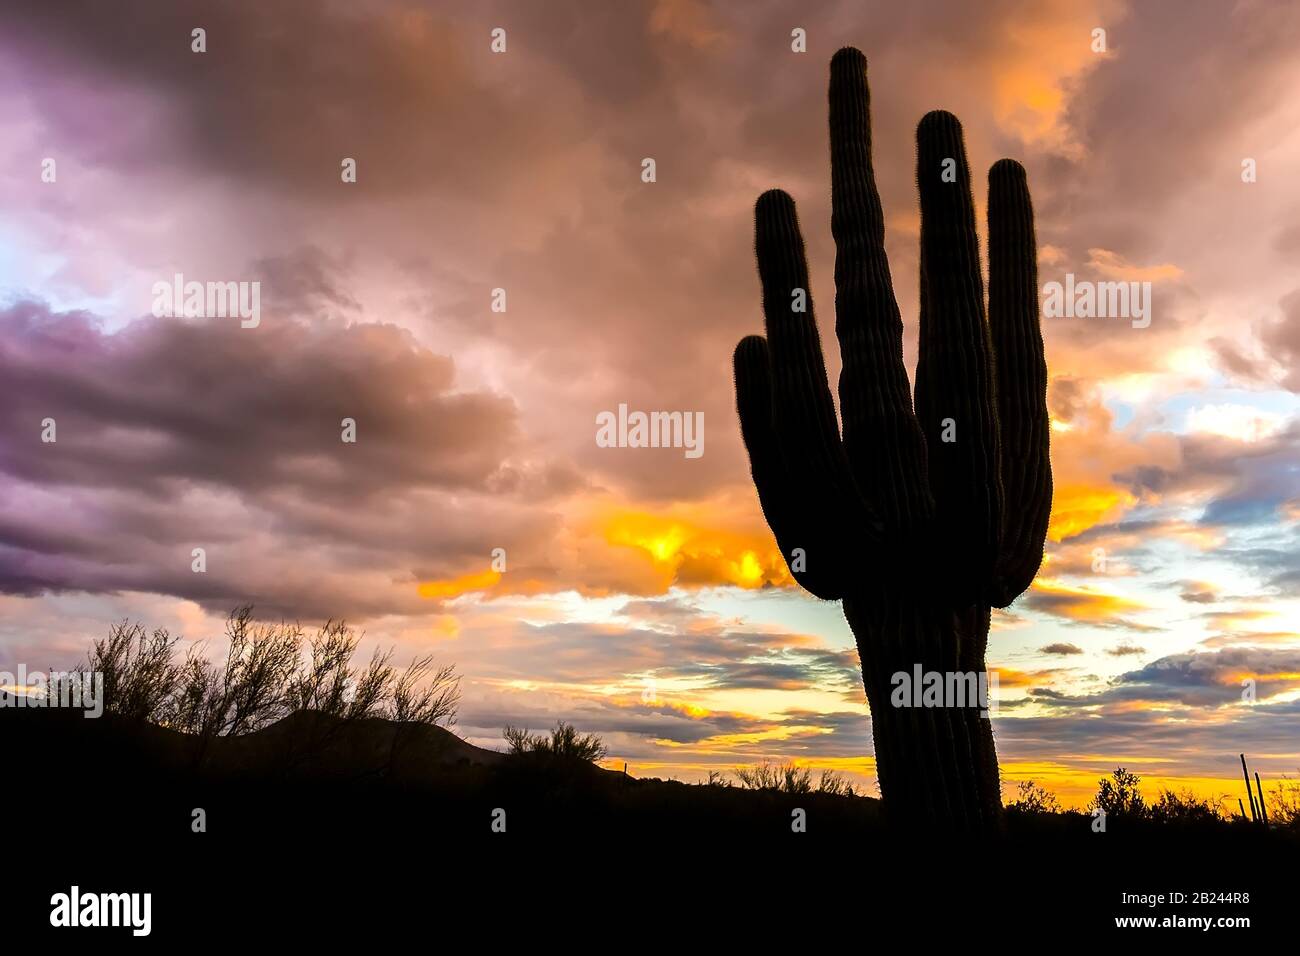 Saguaro Cactus at Sunset-McDowell Sonoran Preserve-Brown's Ranch. Scottsdale,Arizona. Tonto National Forest. Stock Photo